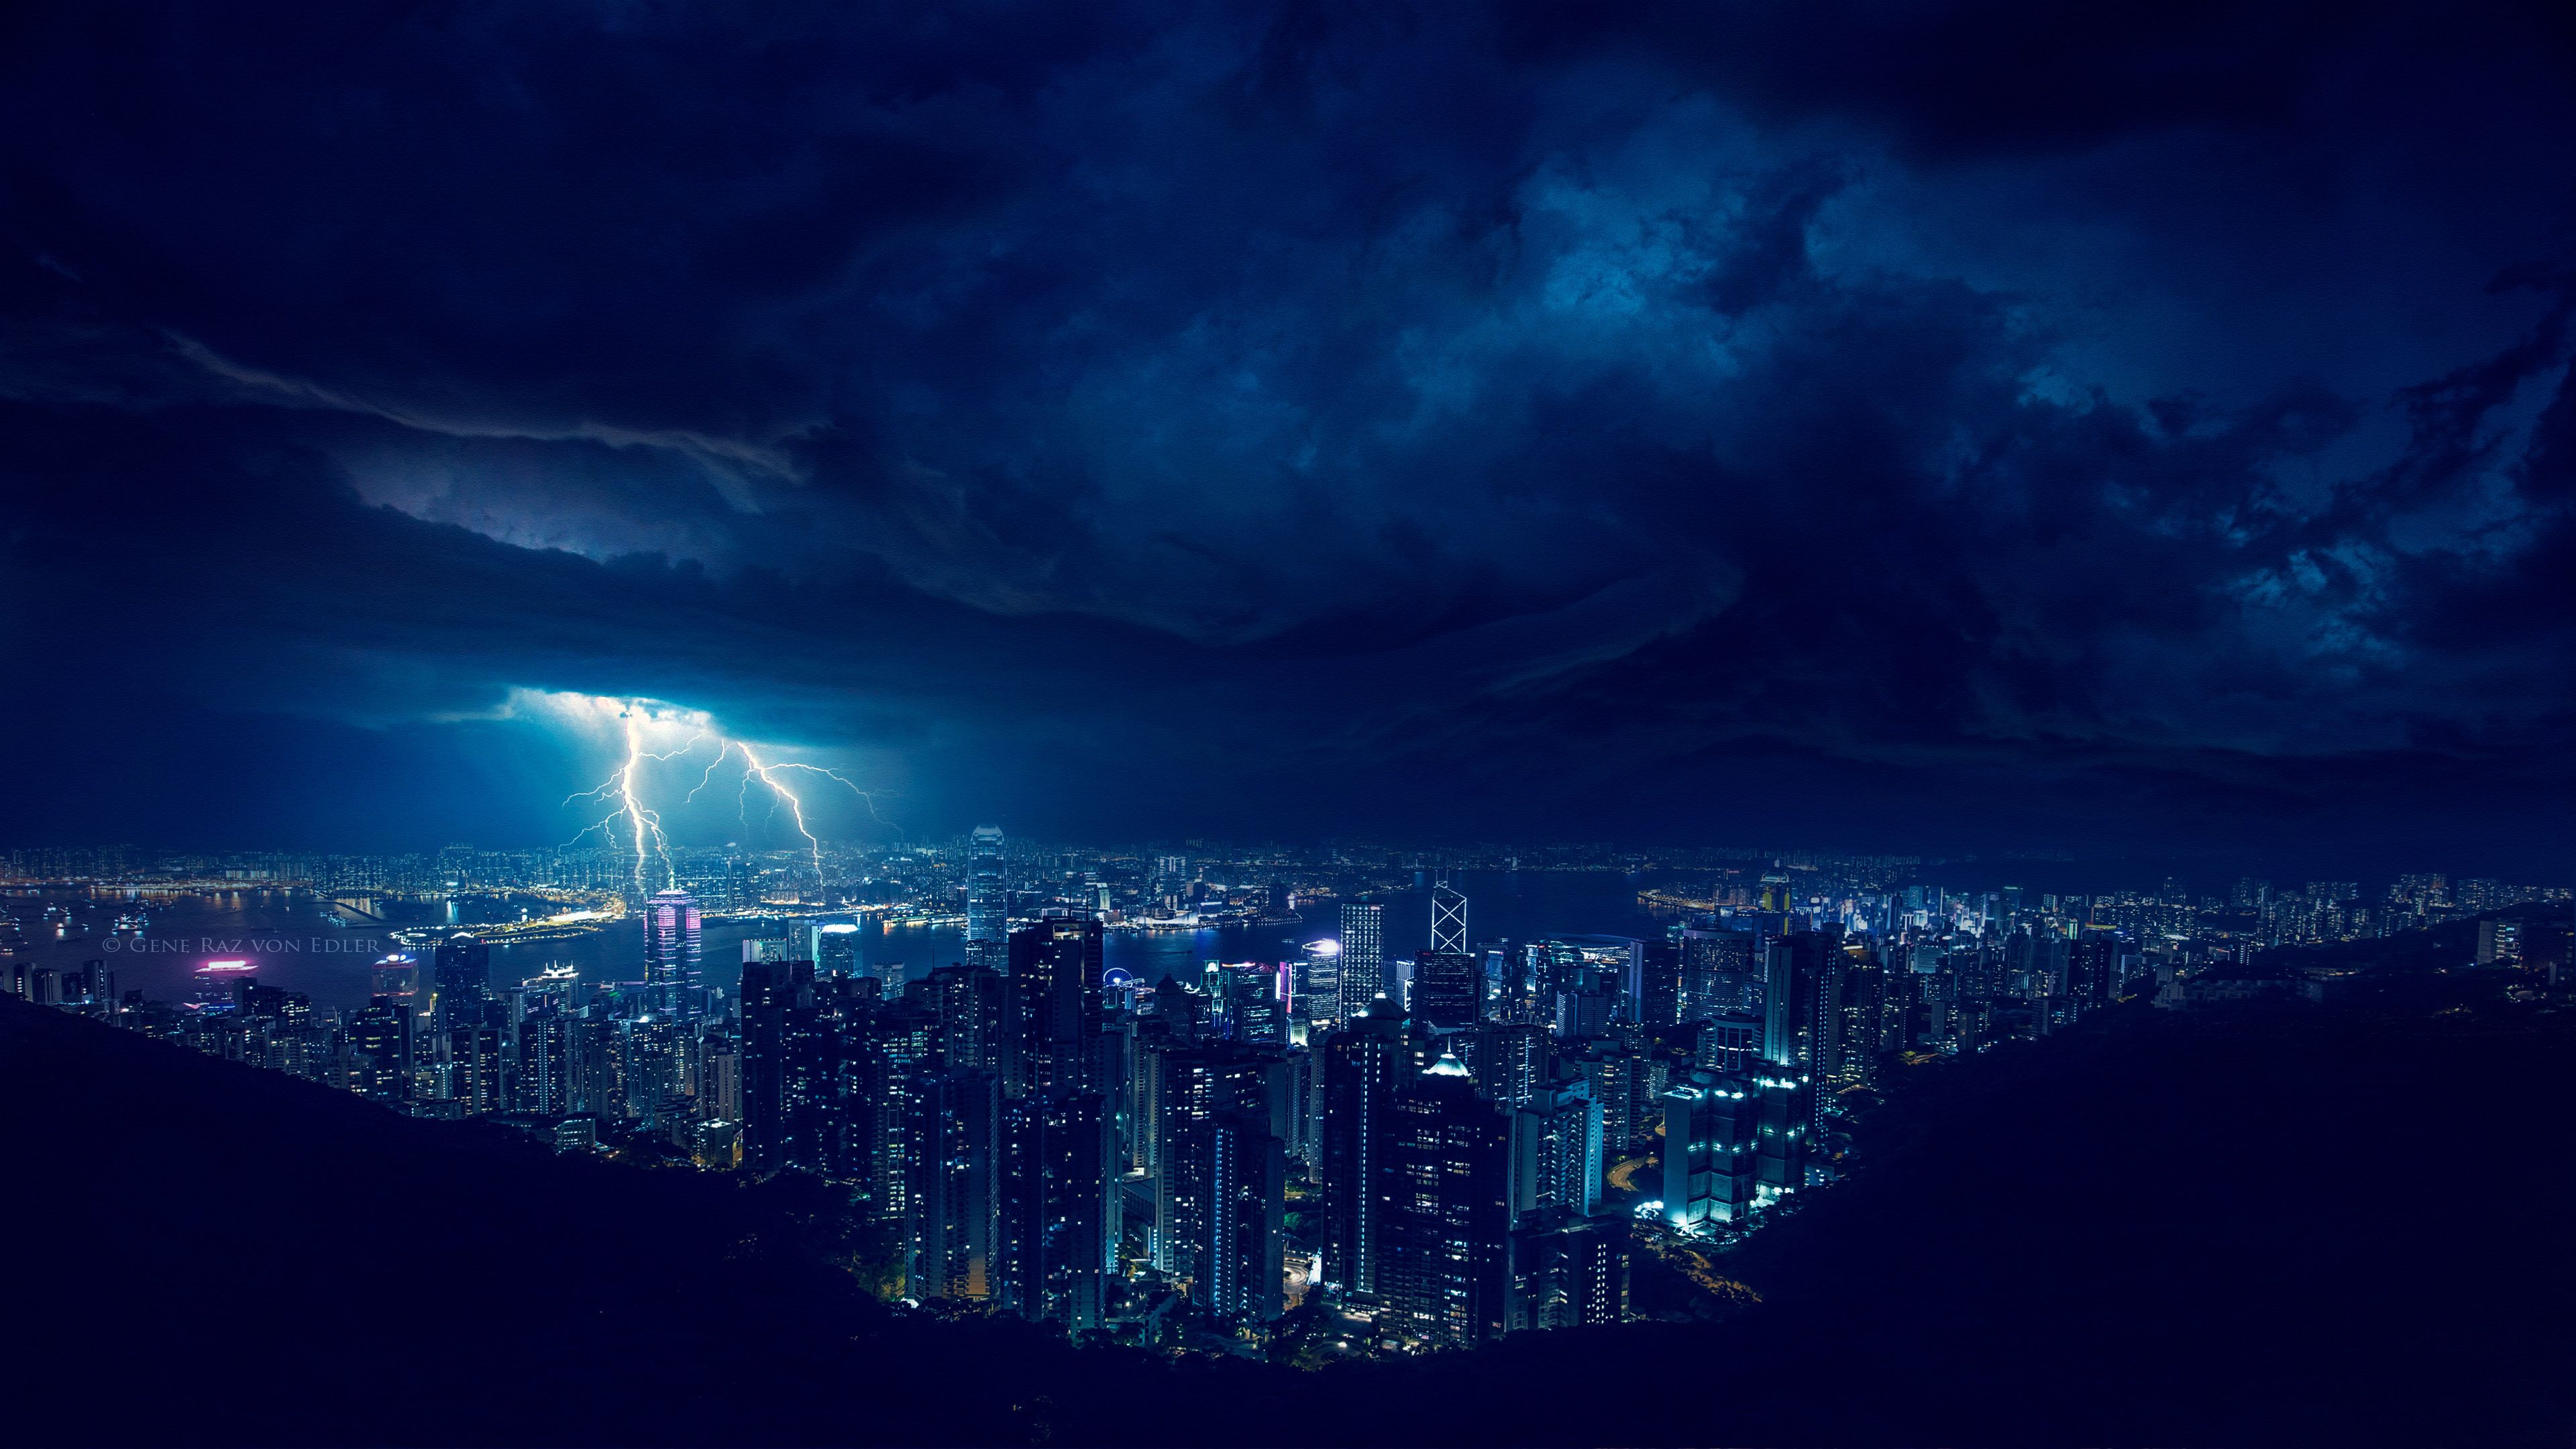 Storm Night Lightning In City 4k, HD Photography, 4k Wallpaper, Image, Background, Photo and Picture